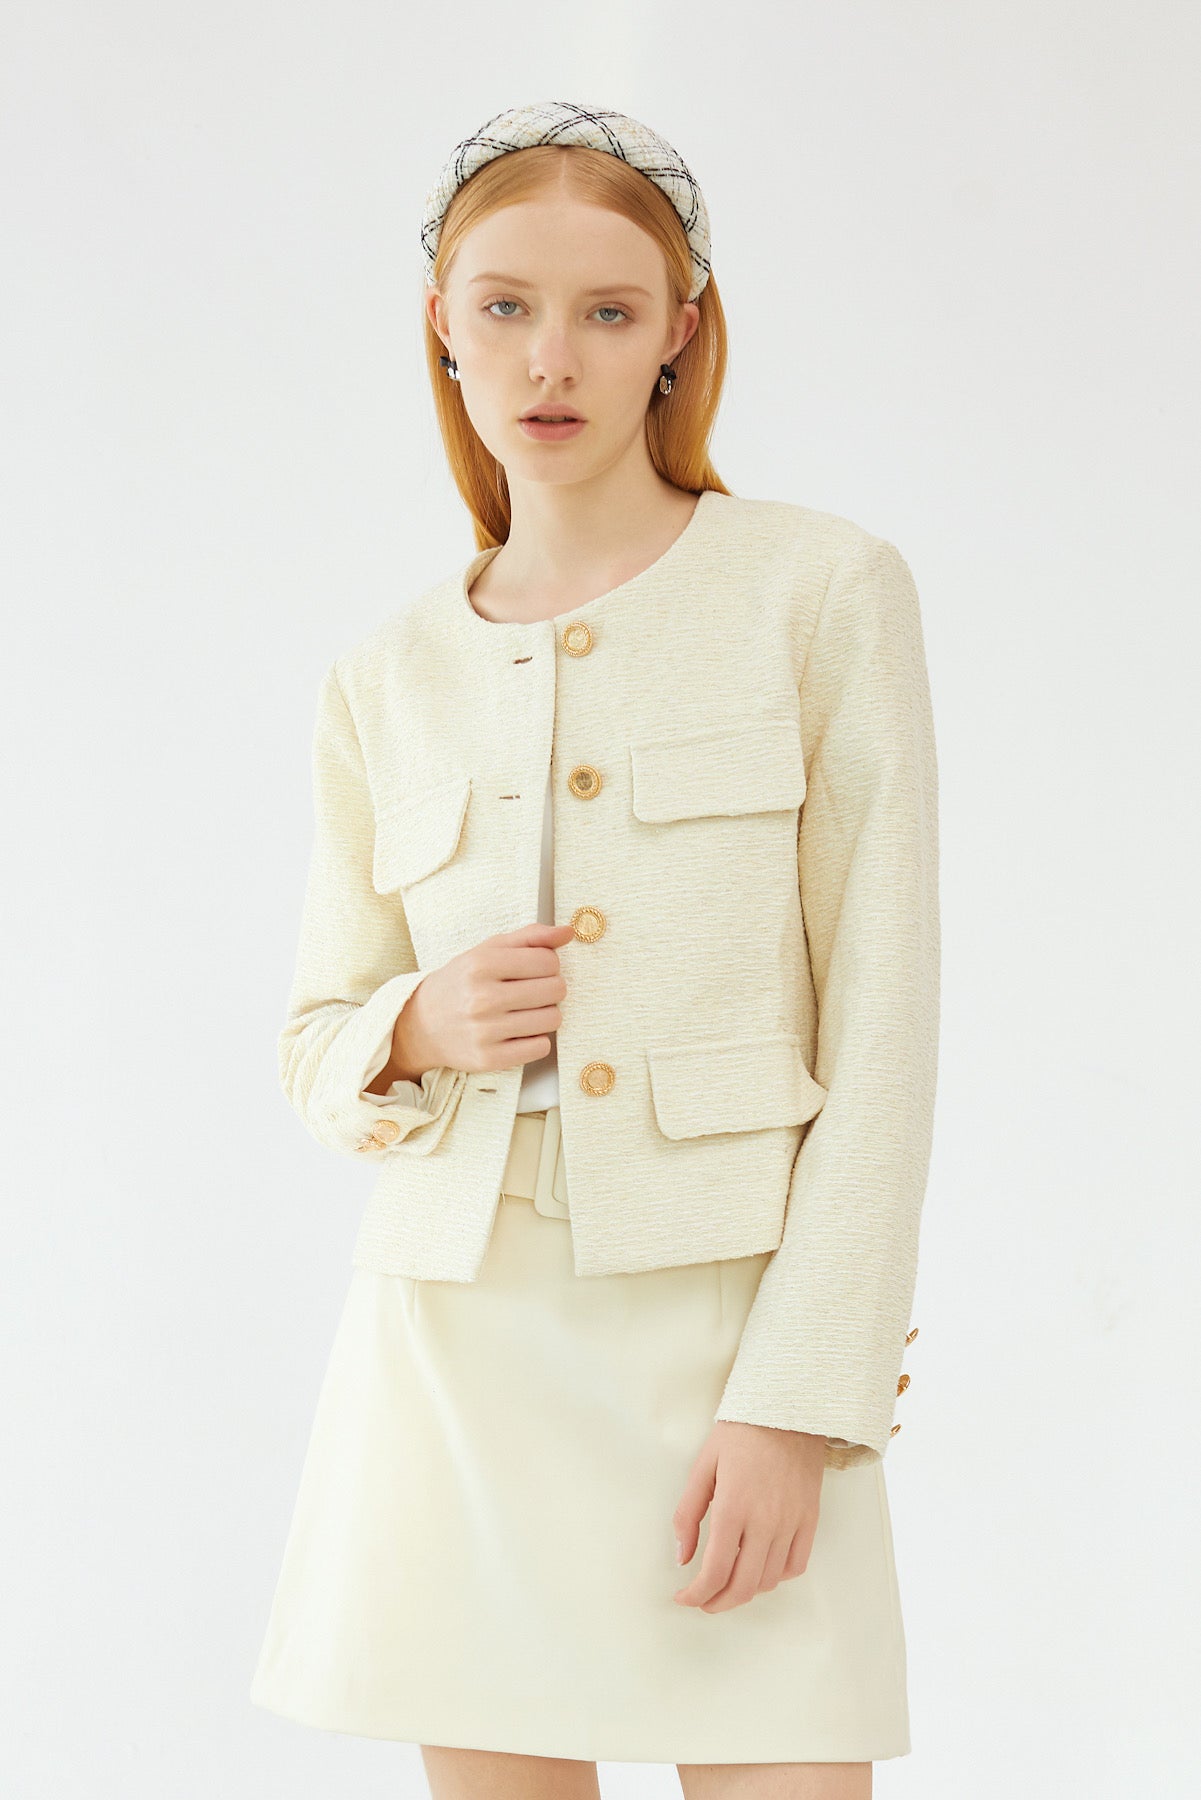 tweed jacket womens outfits. this jacket is under $50 and so